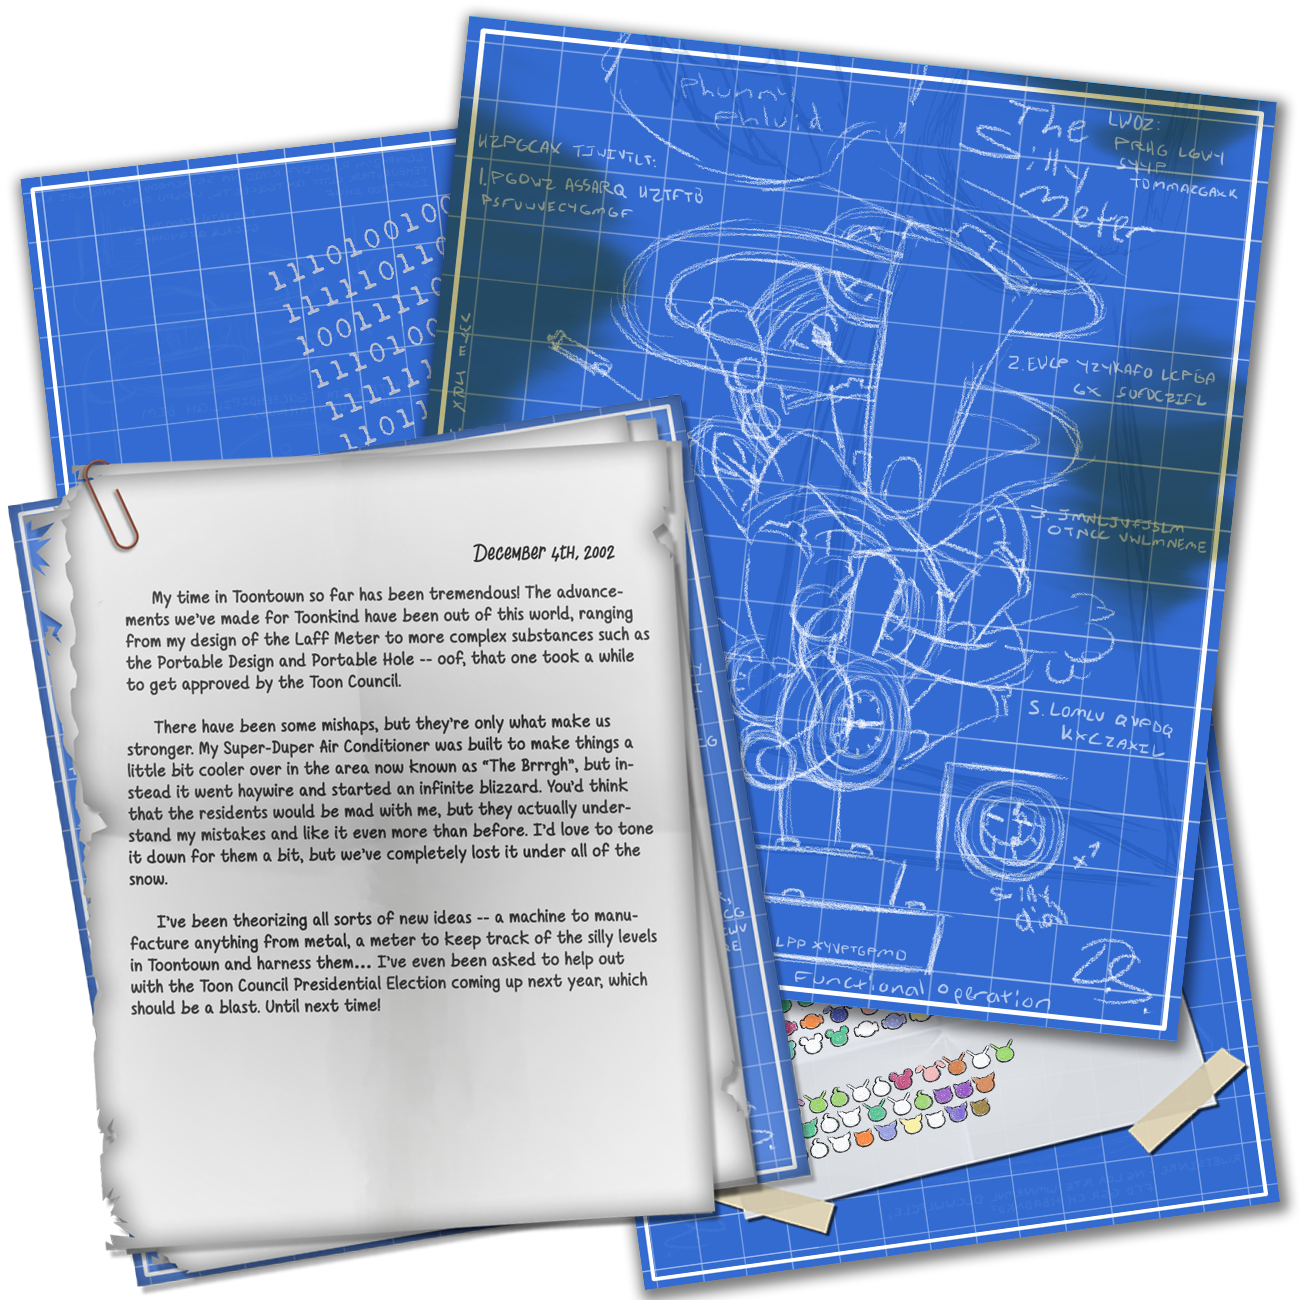 Doctor Surlee's blueprints and papers.